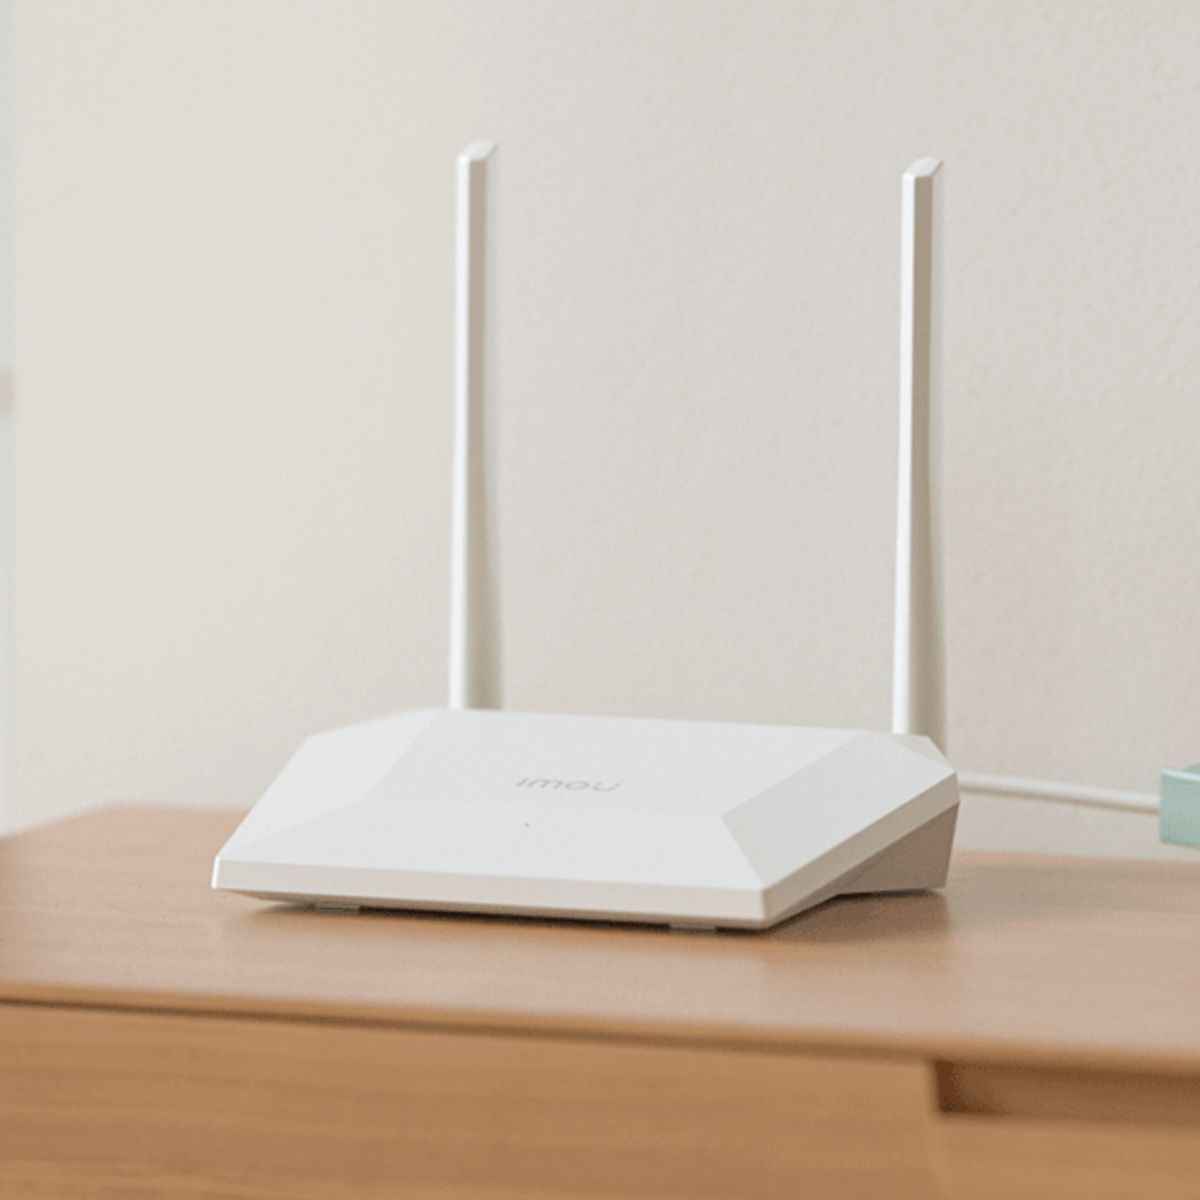 Imou HR300 300Mbps Wireless Wi-Fi Router